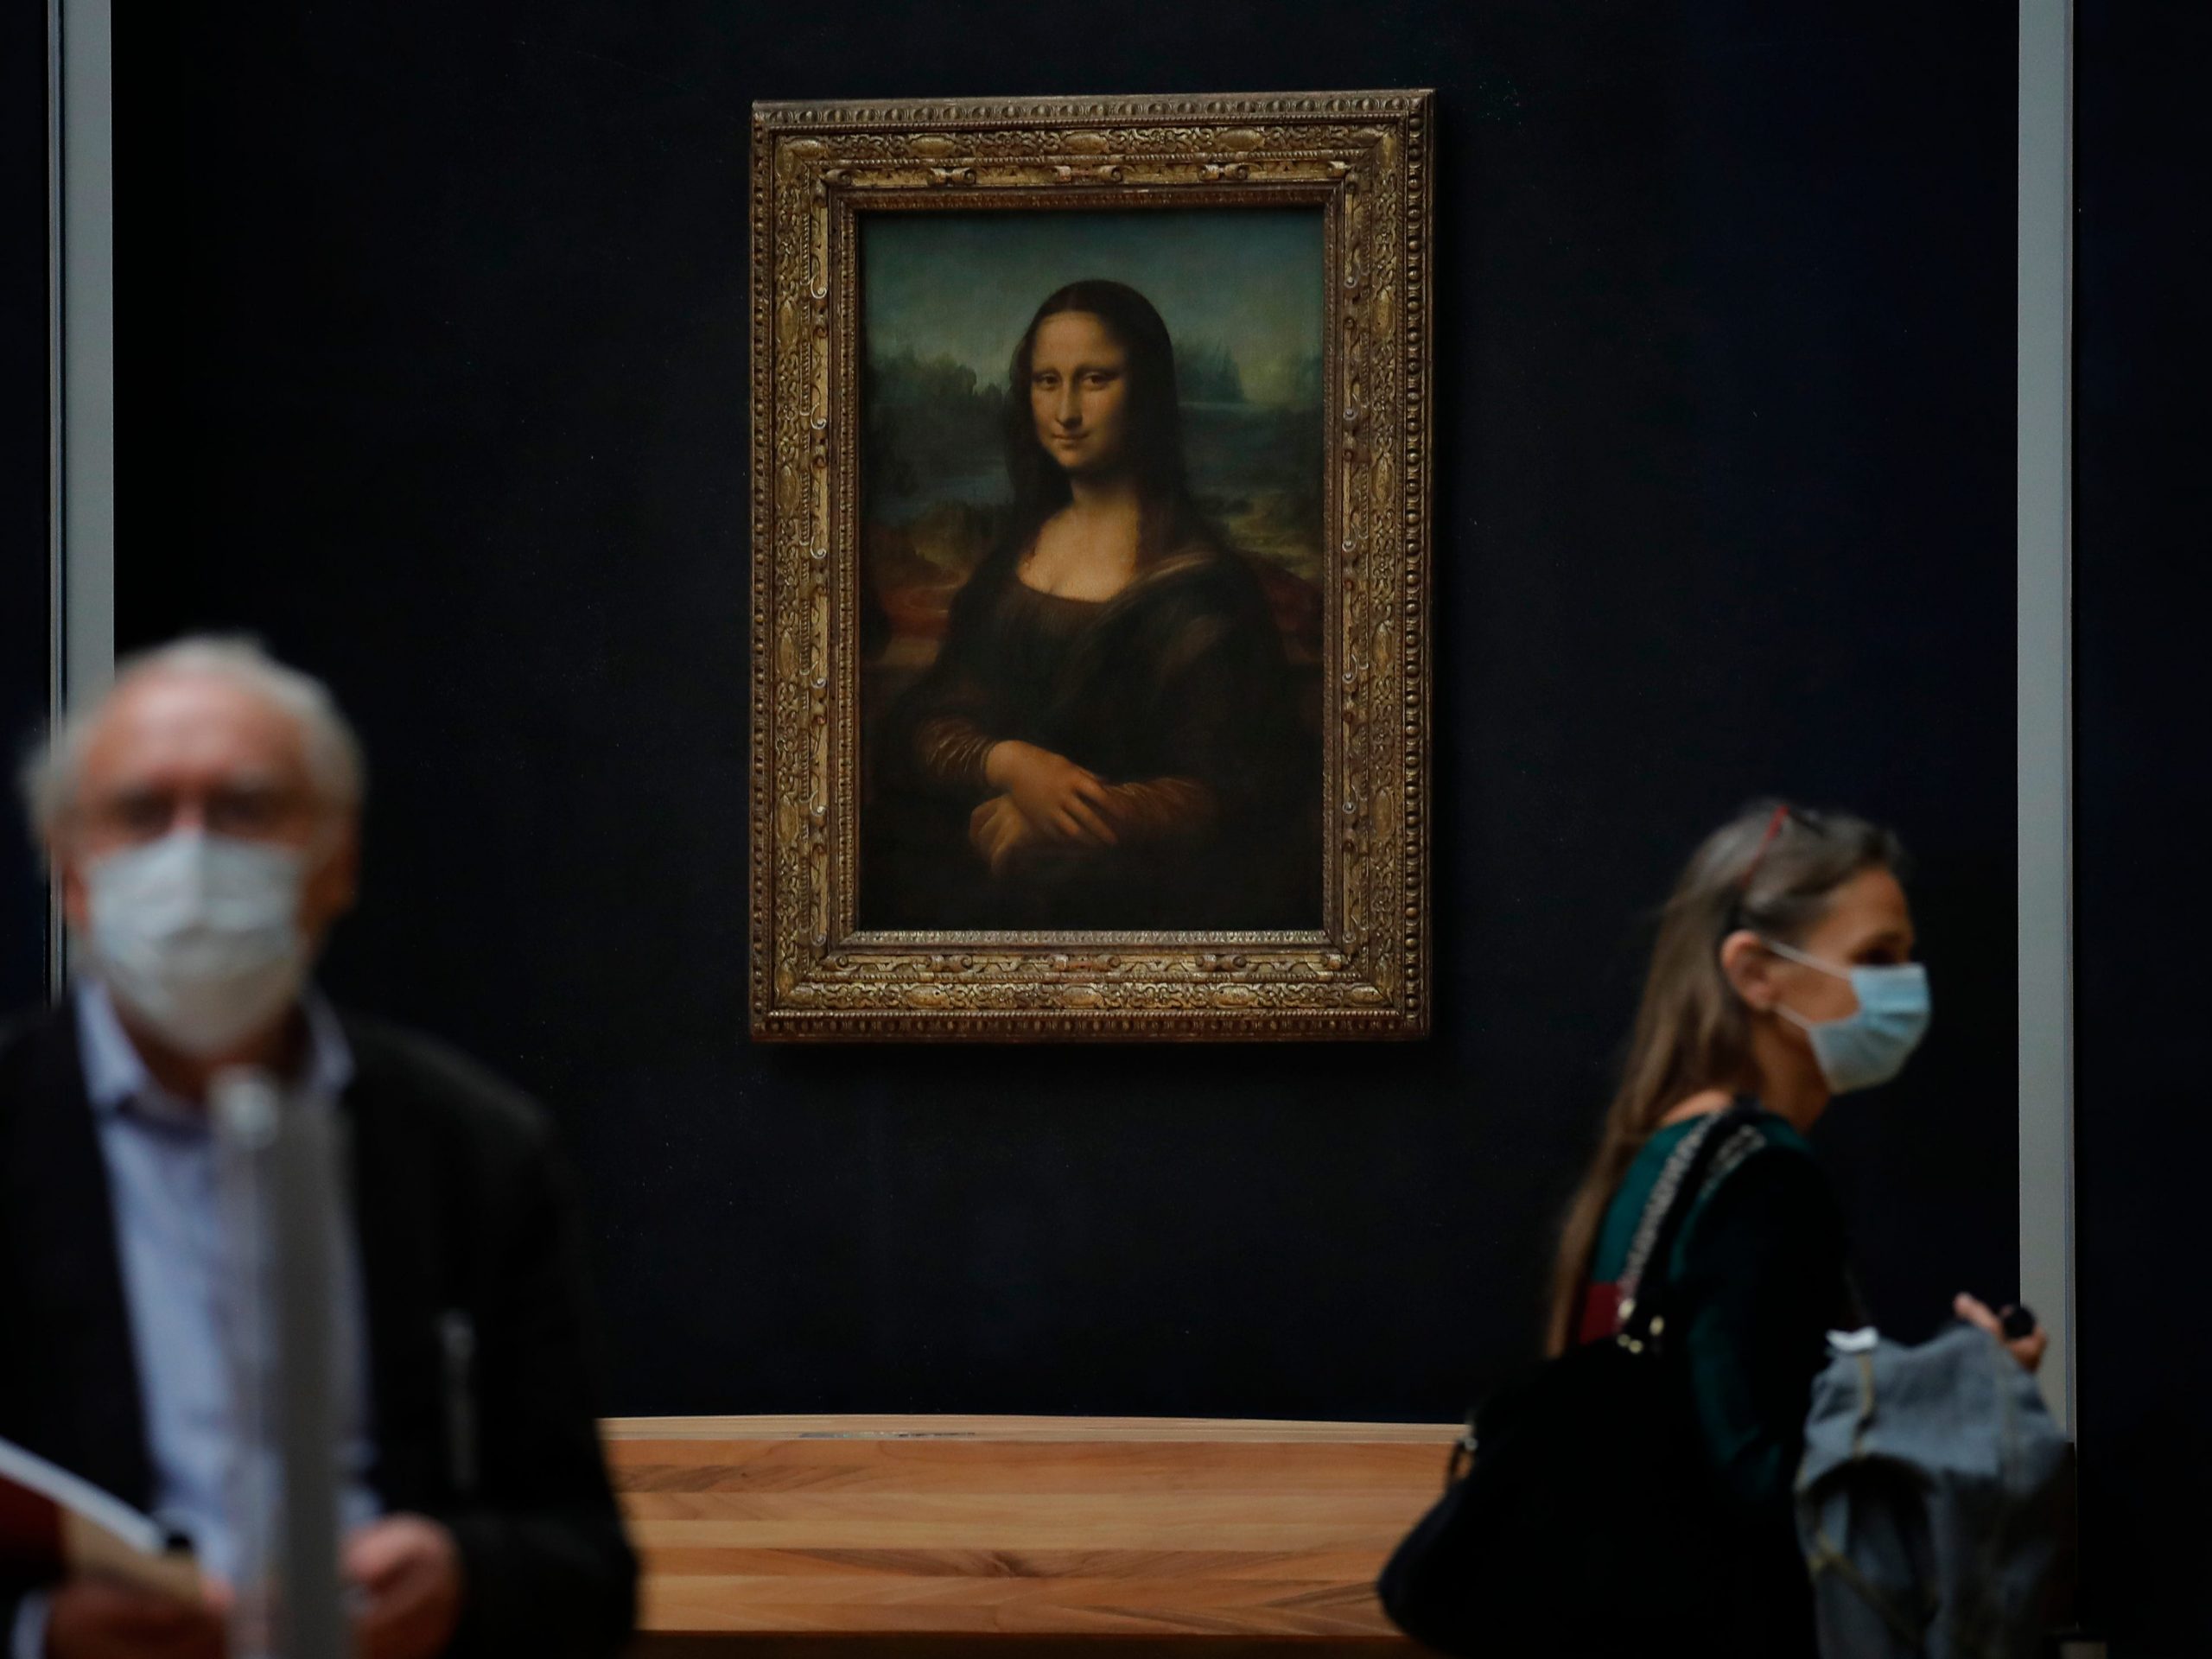 Journalists walk past Leonardo da Vinci's Mona Lisa during a visit of the Louvre museum ahead of its reopening next July 6, in Paris, Tuesday, June 23, 2020.  After four months of virus-imposed inactivity, the world's most visited museum is counting on the world’s most famous portrait, the “Mona Lisa” to help lure back visitors, when the Louvre reopens on July 6.(AP Photo/Christophe Ena)